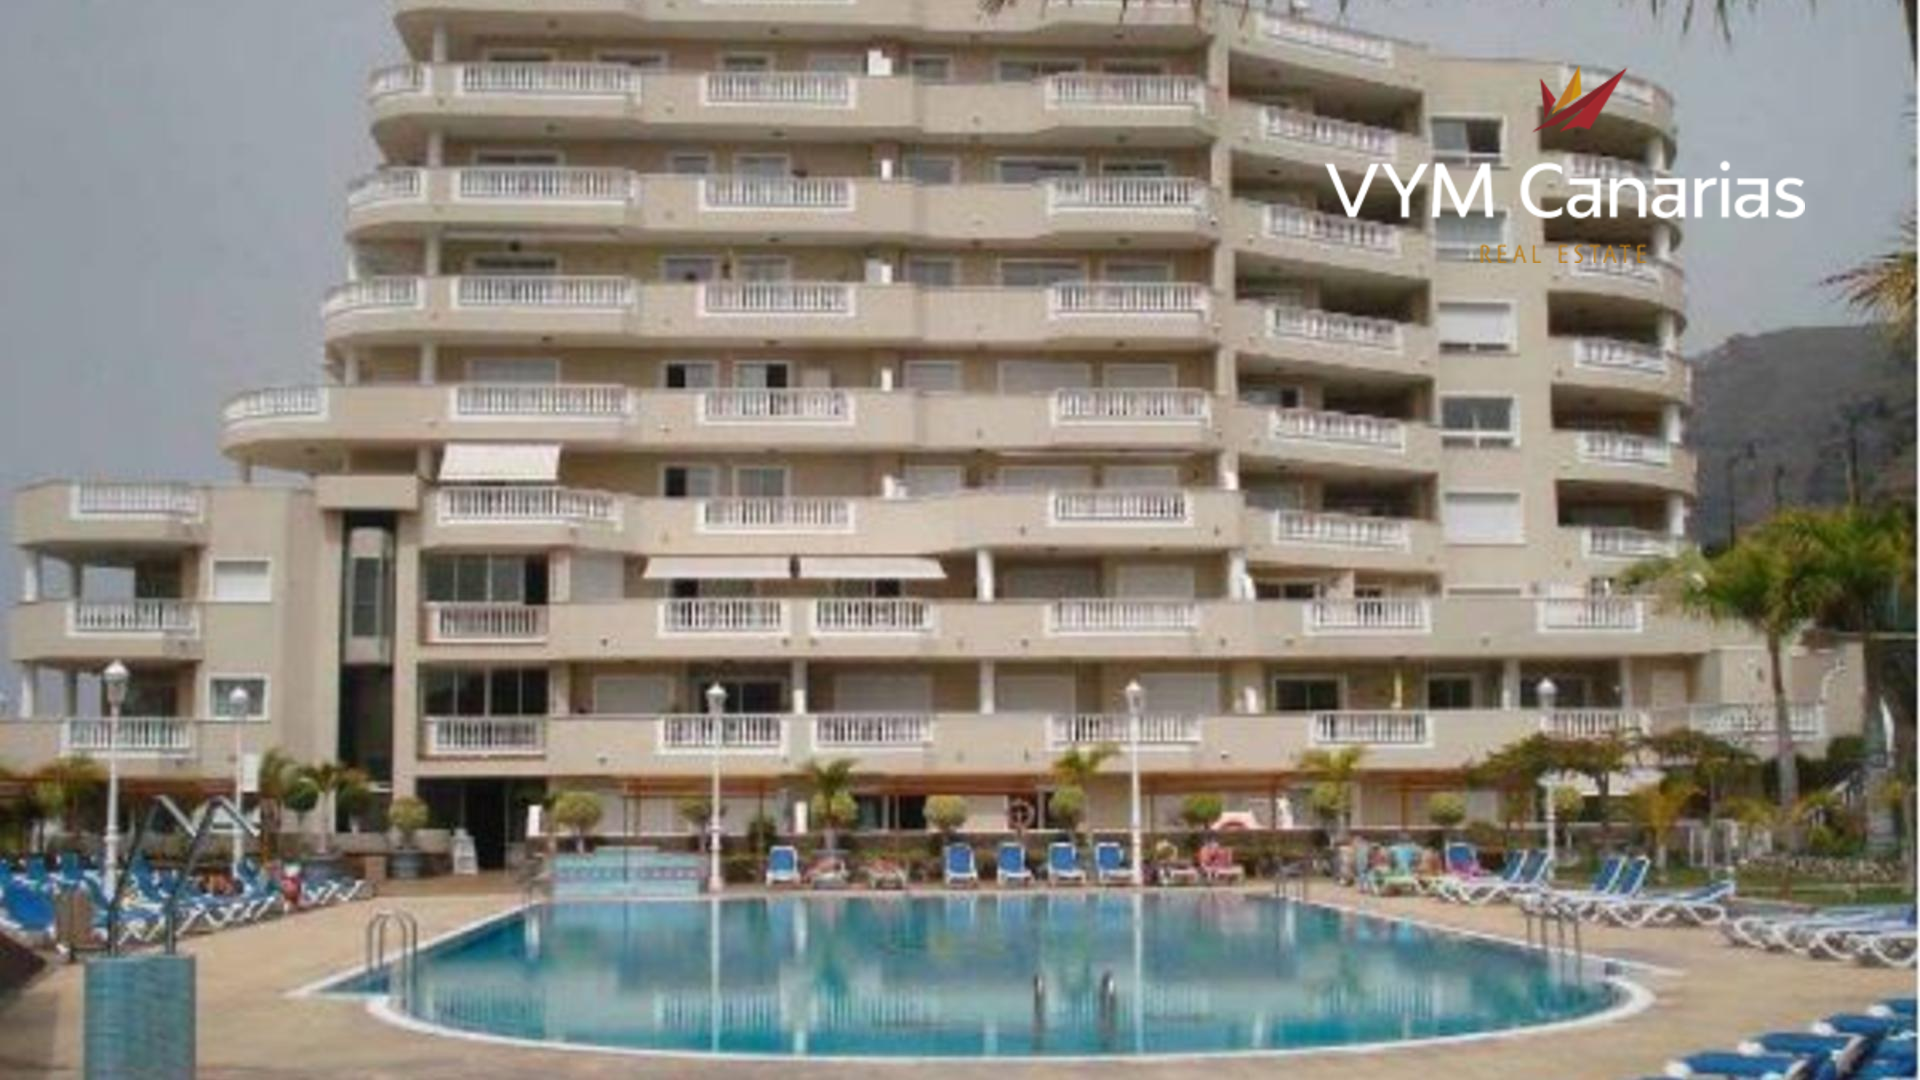 Apartment in Los Gigantes marketed by Vym Canarias